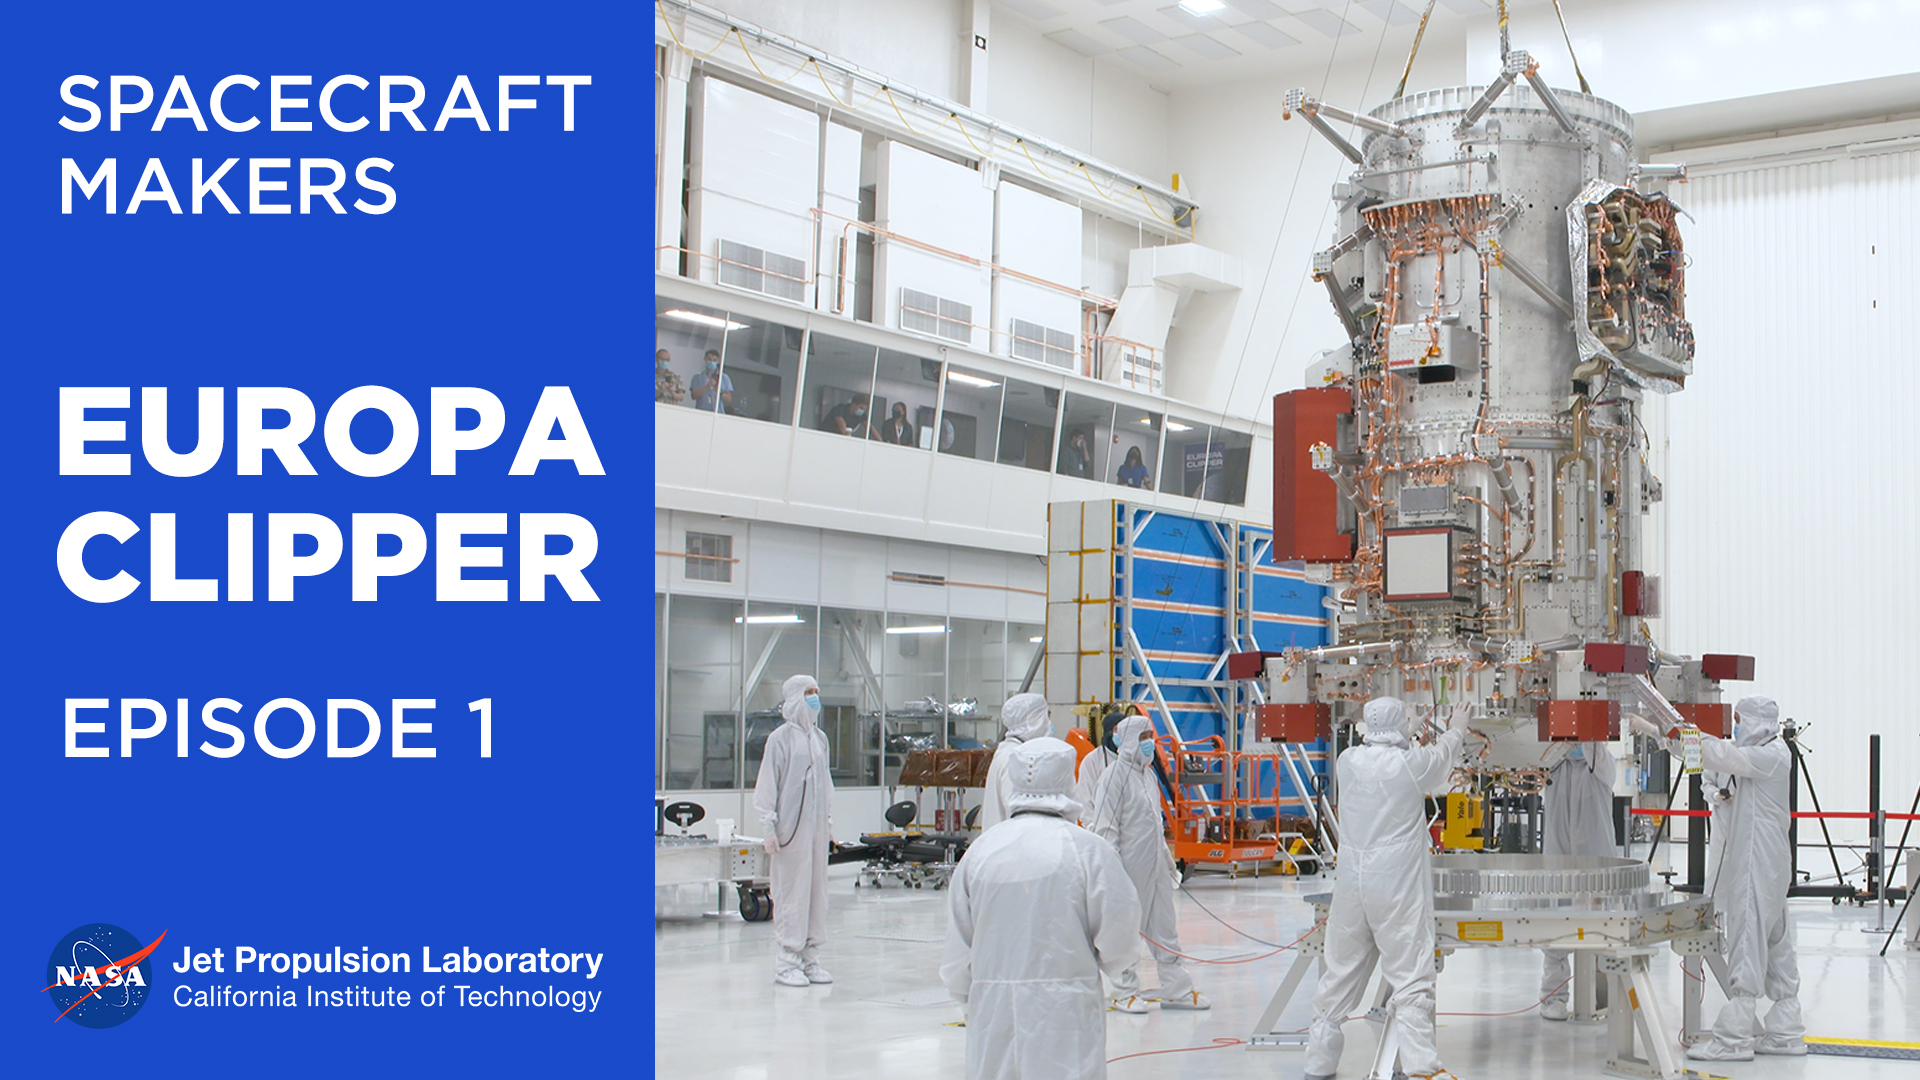 A split graphic and image for a video about Europa Clipper. On the left is the graphic with the words "Spacecraft Makers: Europa Clipper, Episode 1". On the right is an image of the spacecraft with workers around it.